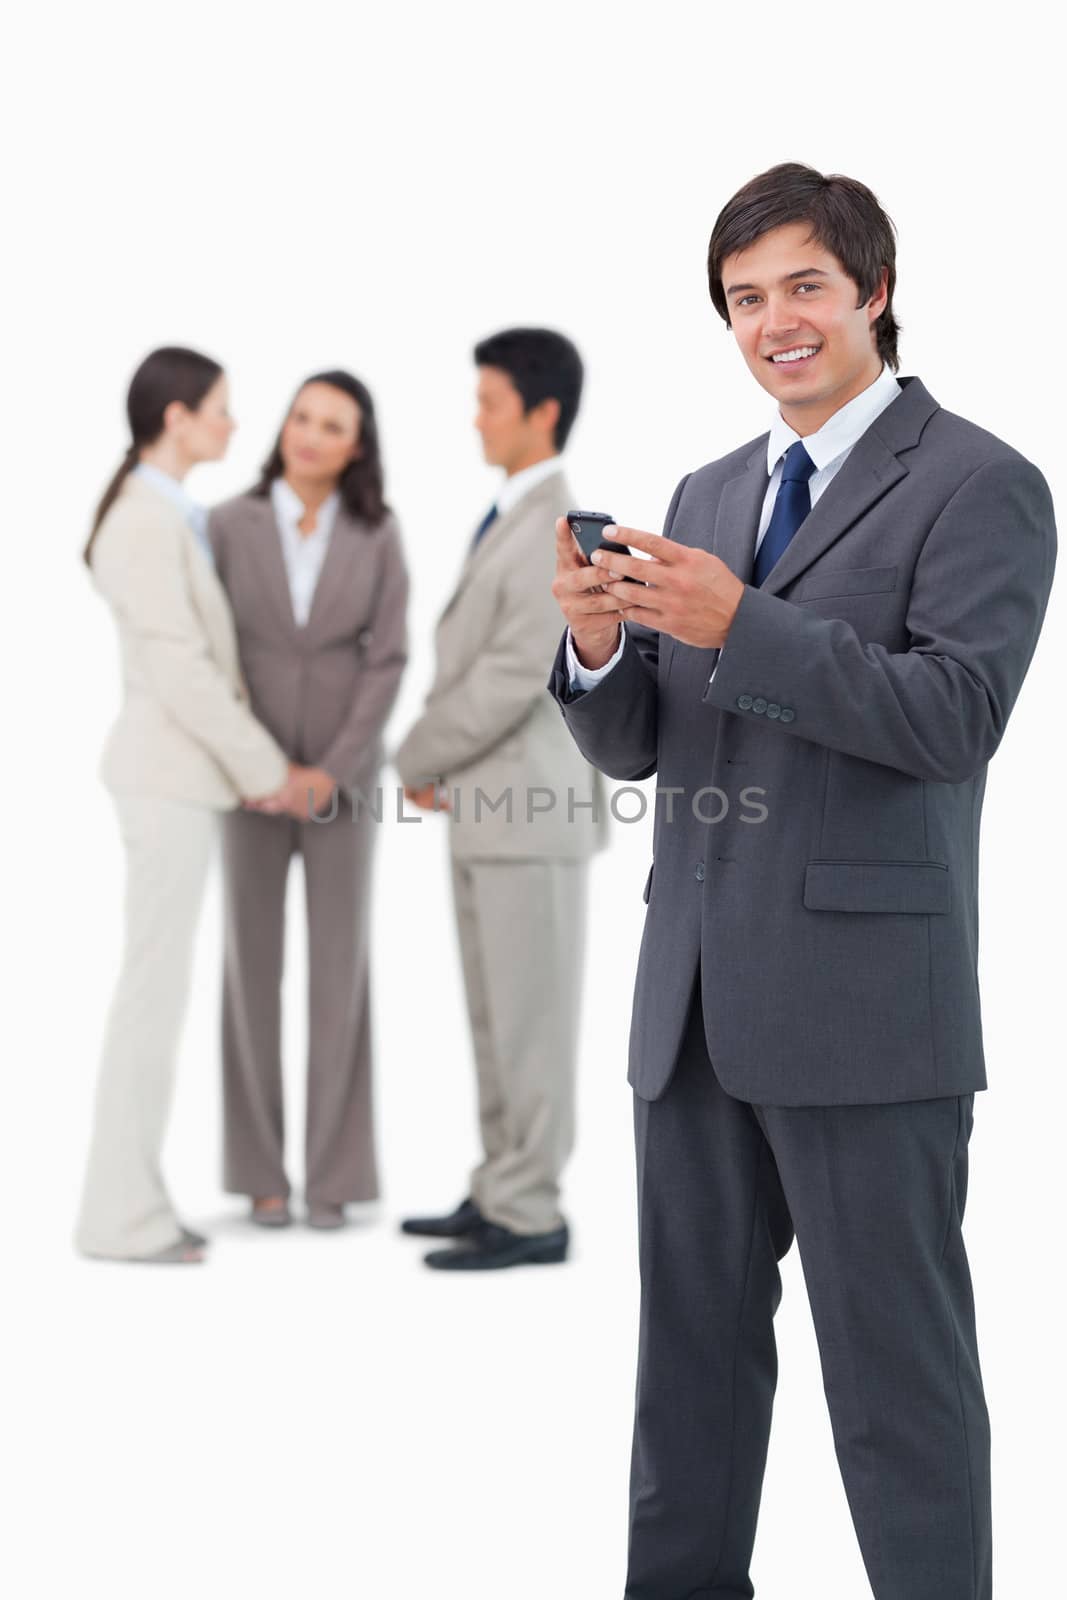 Smiling tradesman with cellphone and colleagues behind him against a white background